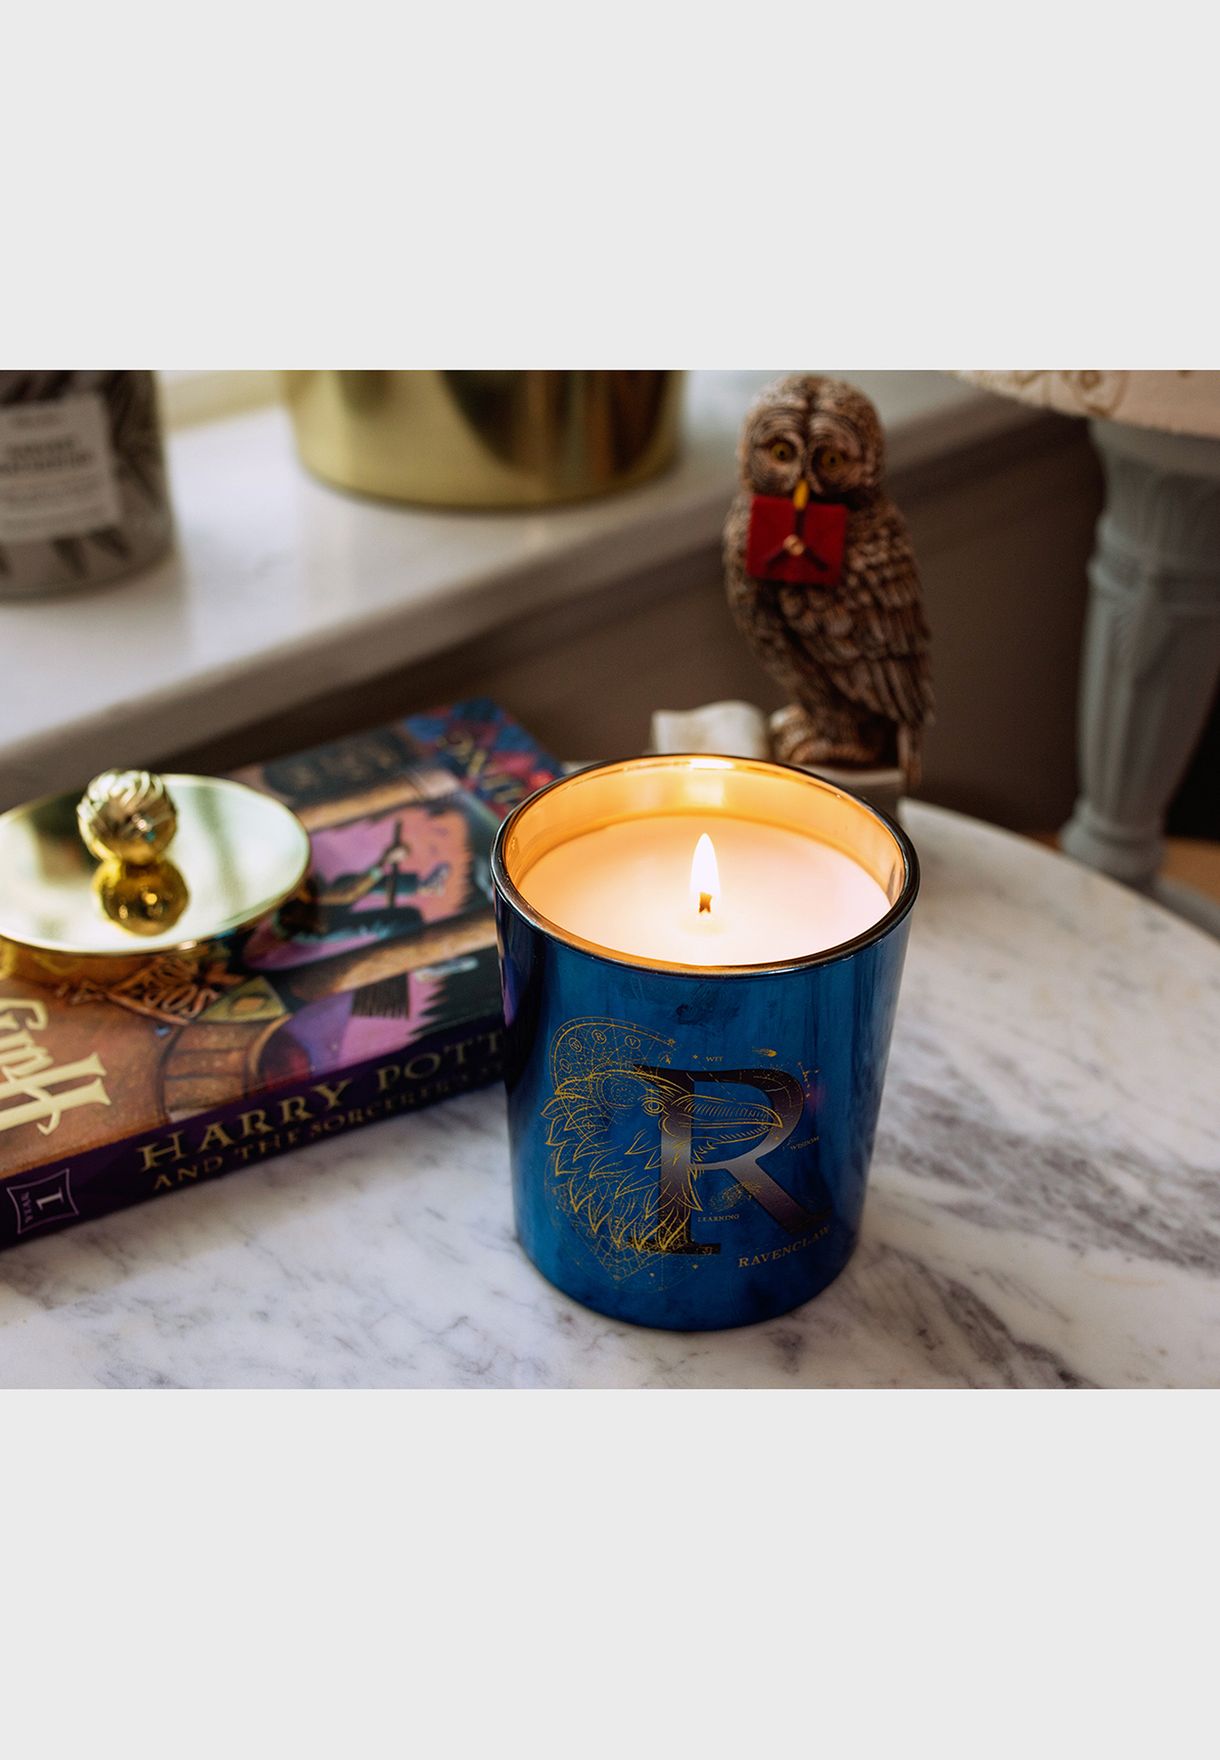 Harry Potter Ravenclaw Premium Soy Wax Candle